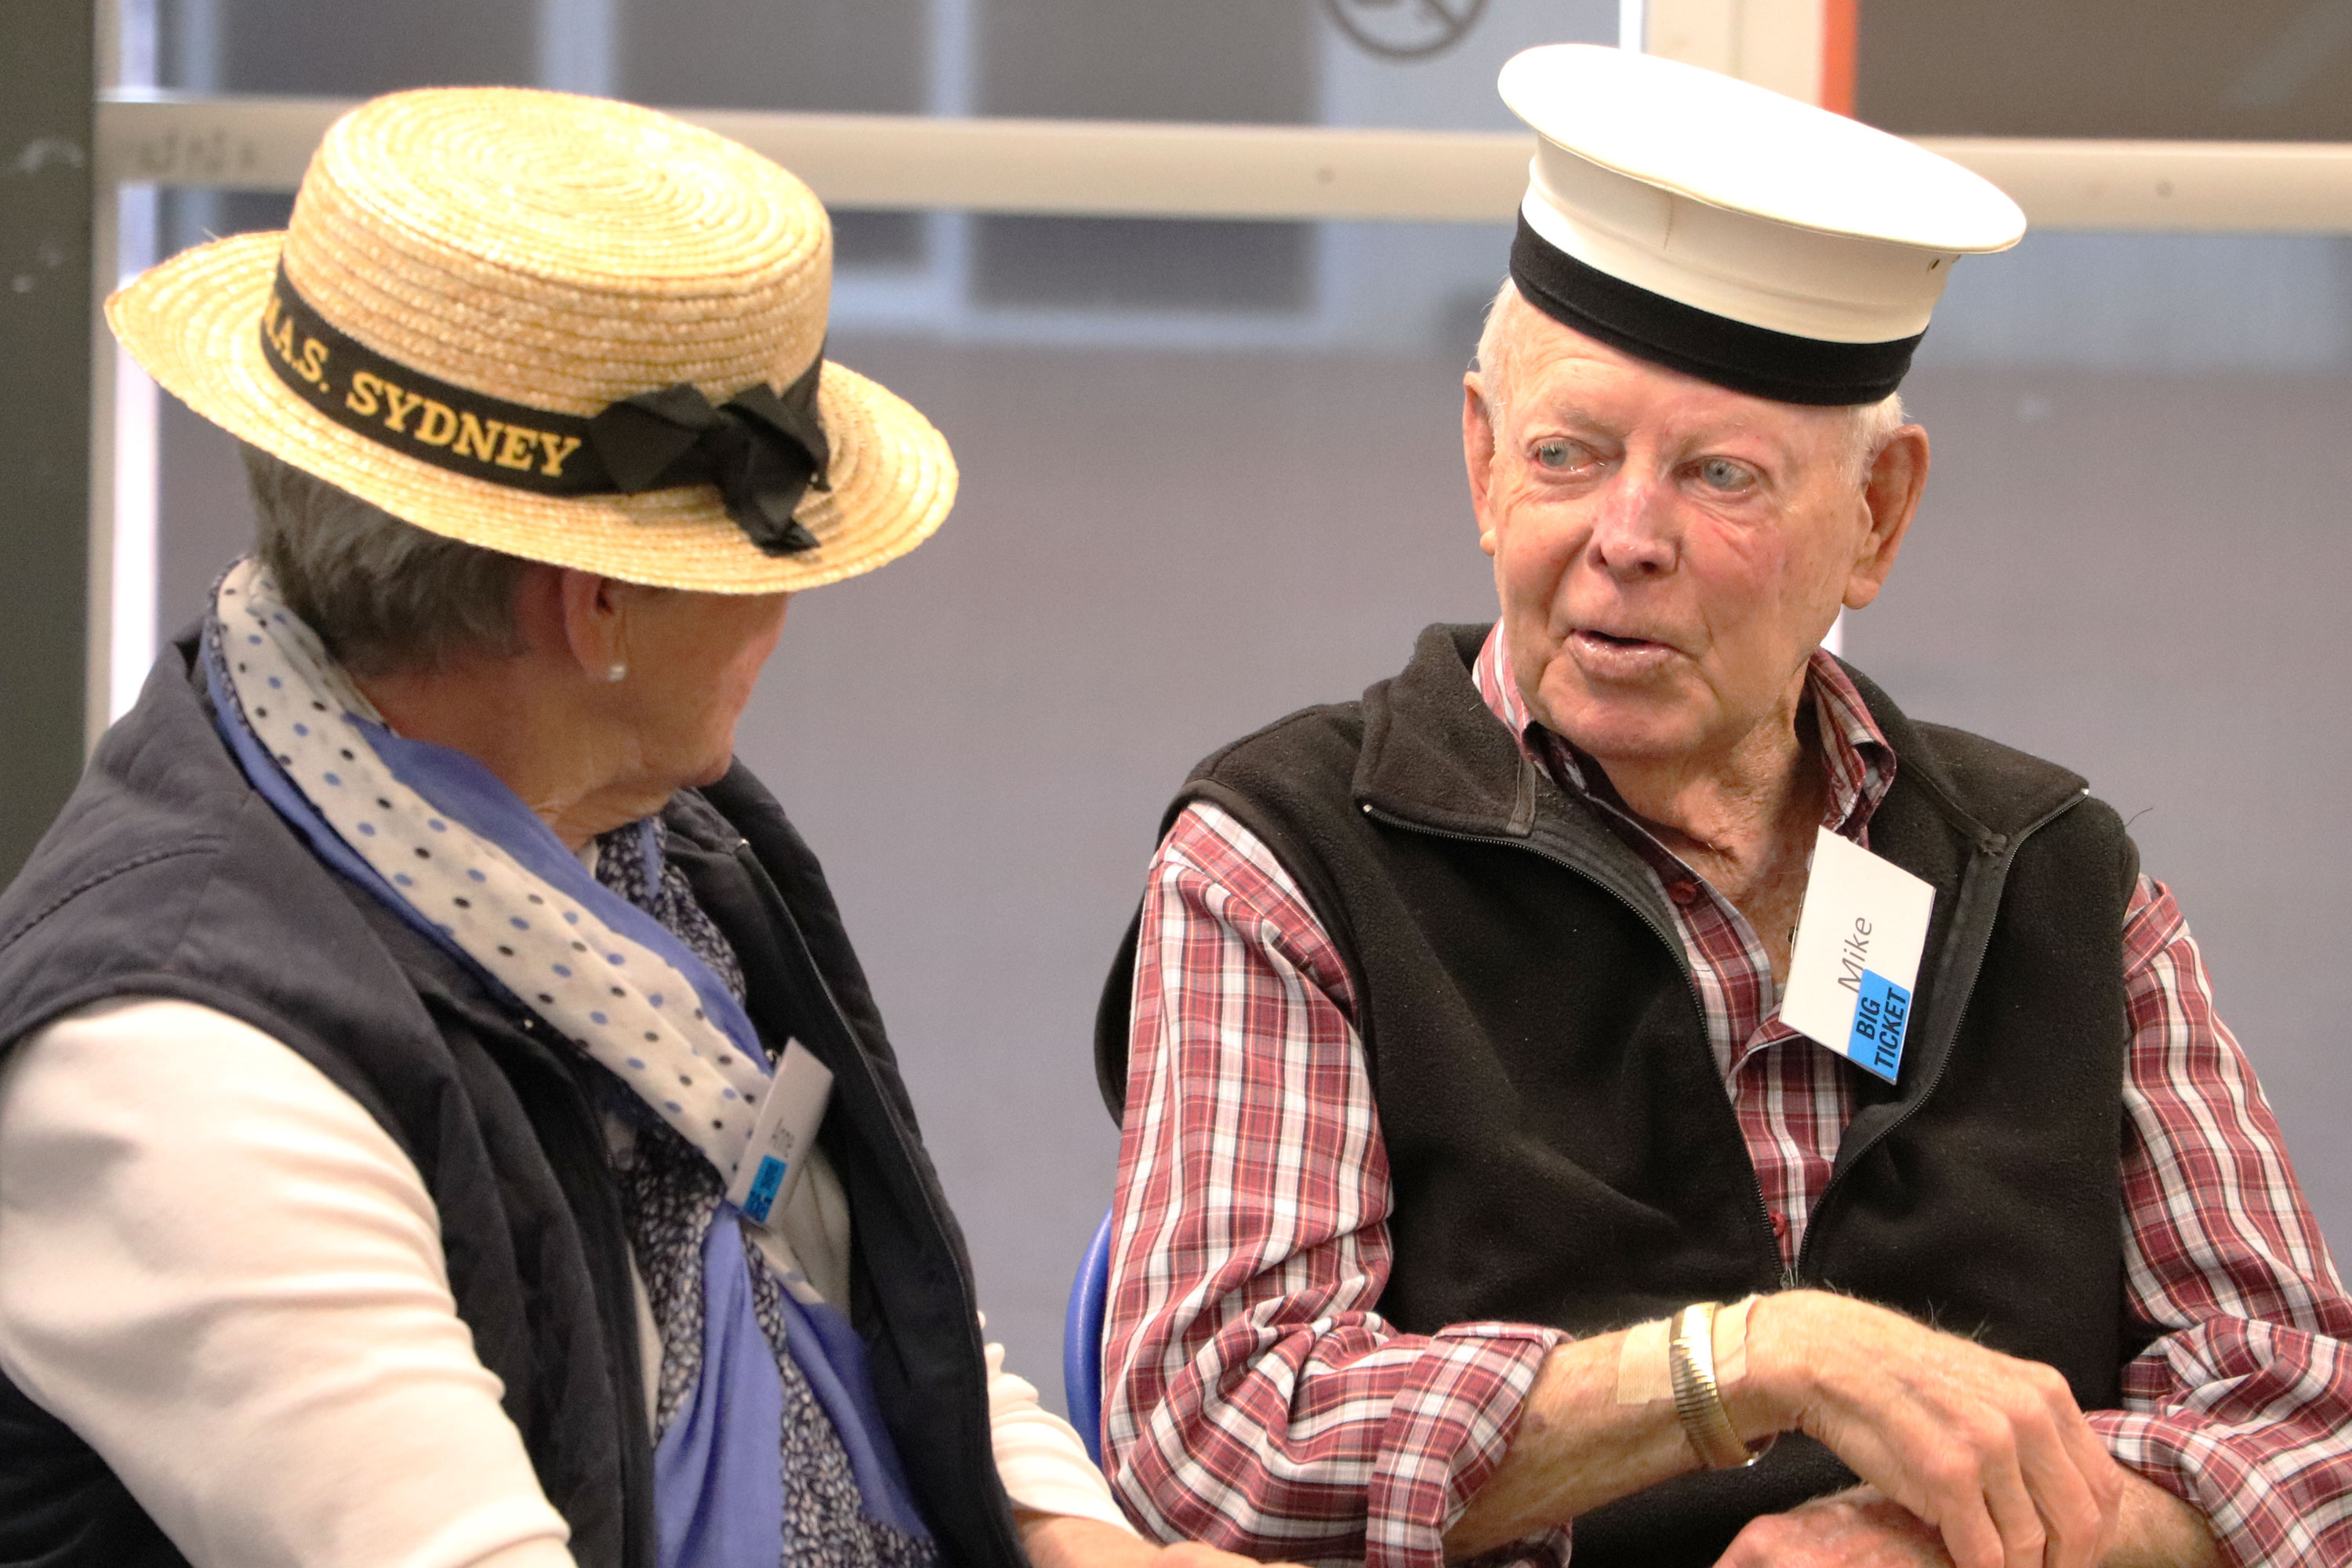 Two elderly visitors wearing nautical hats